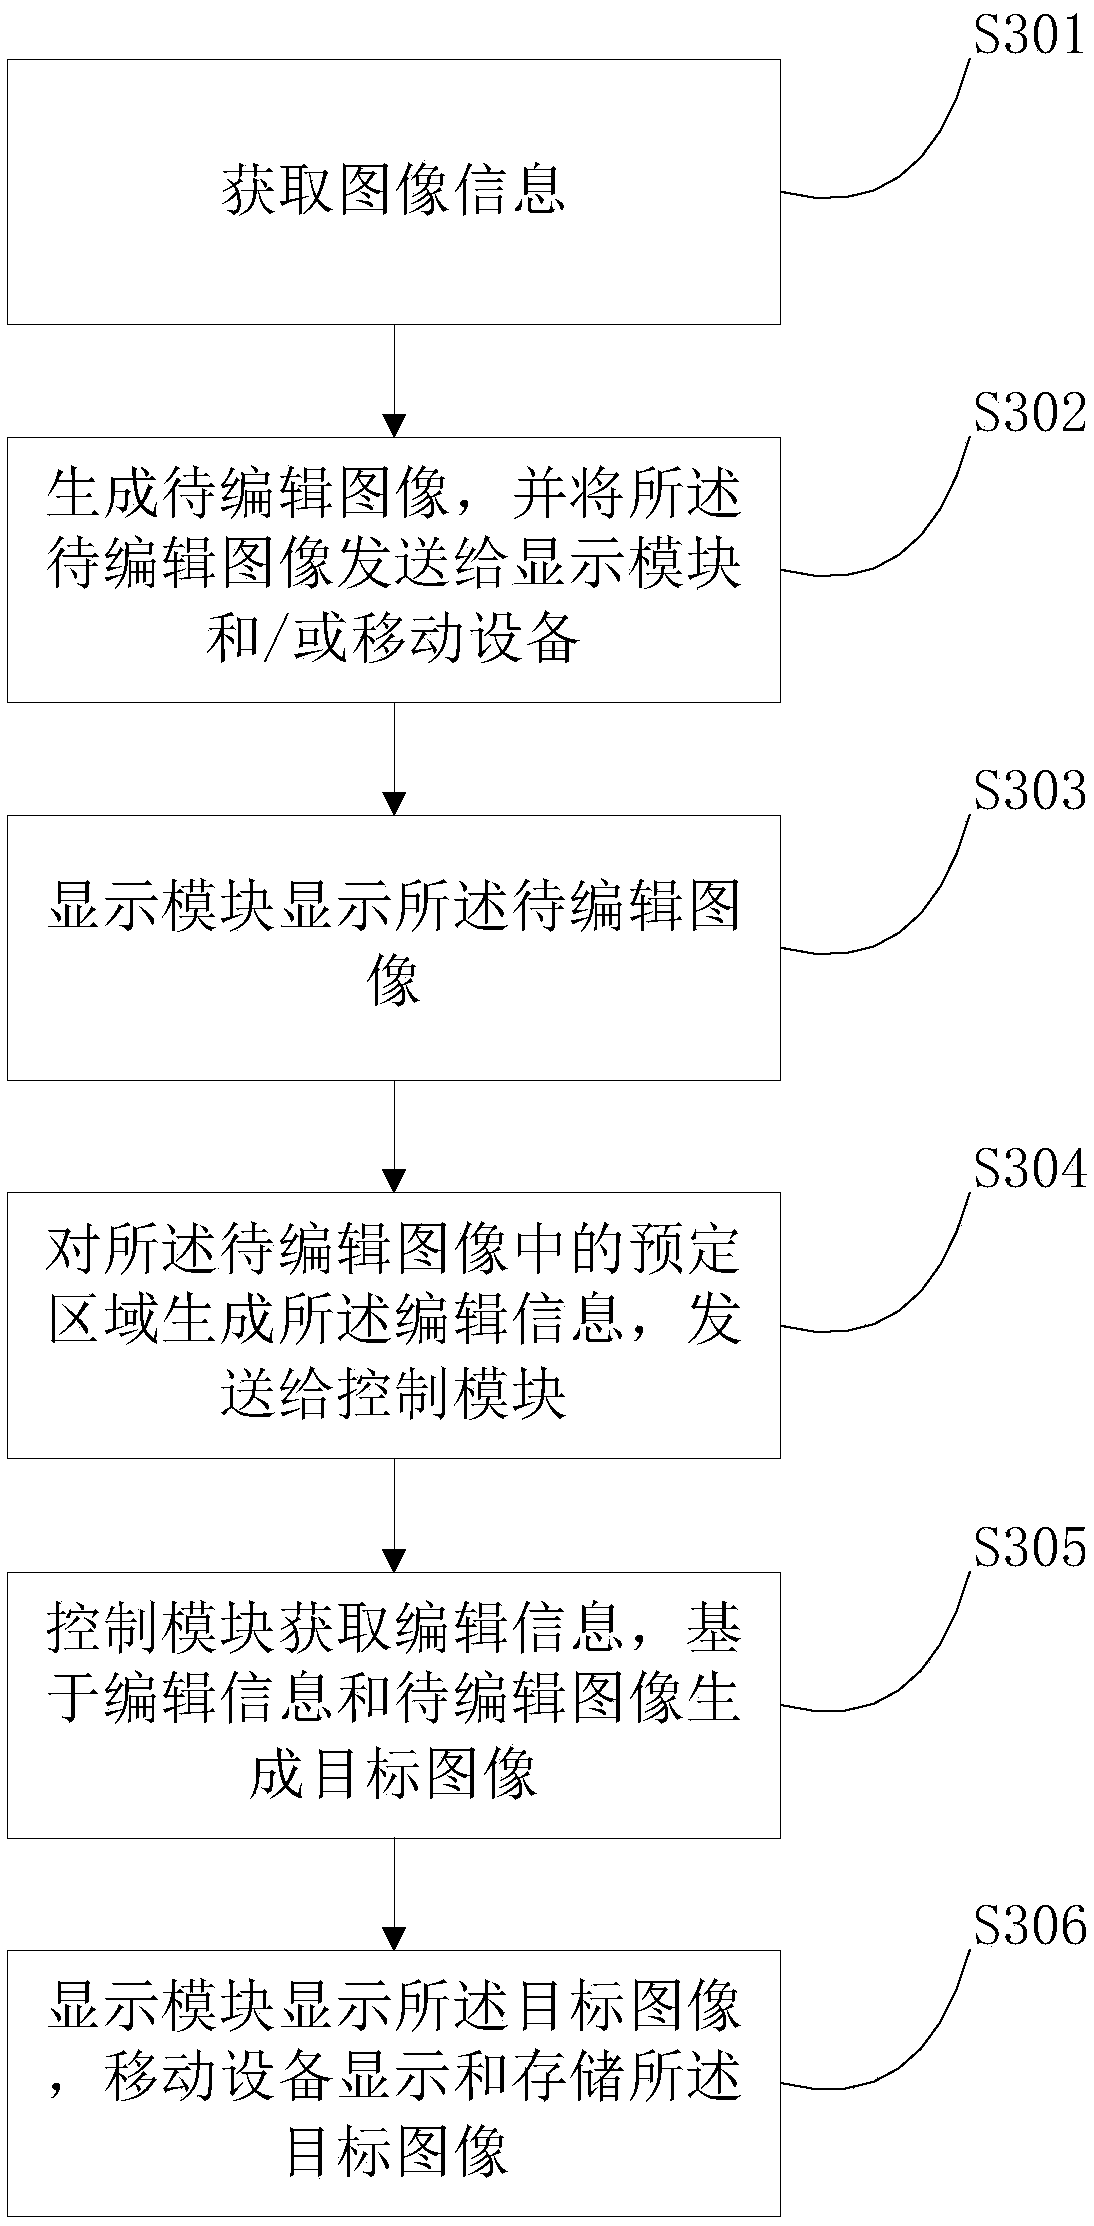 A window display device and method